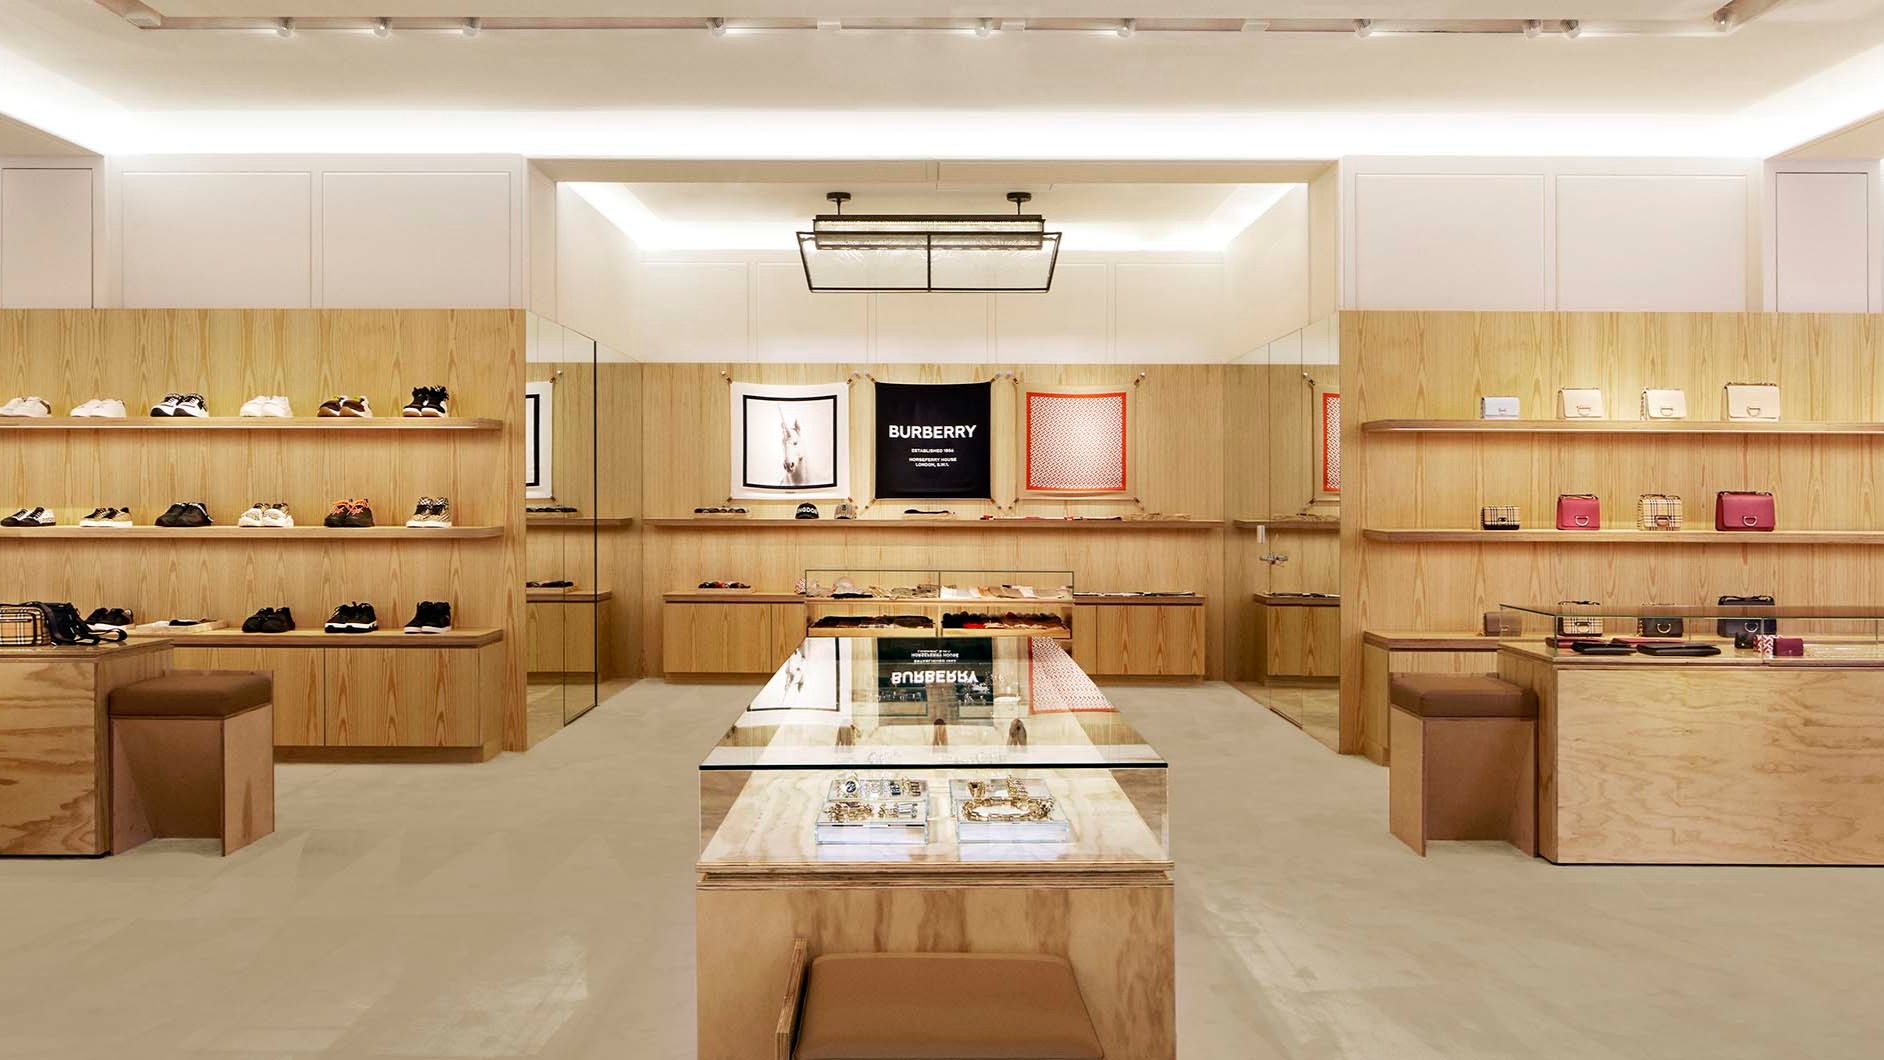 Burberry store close-up with shoes and bags on shelves.